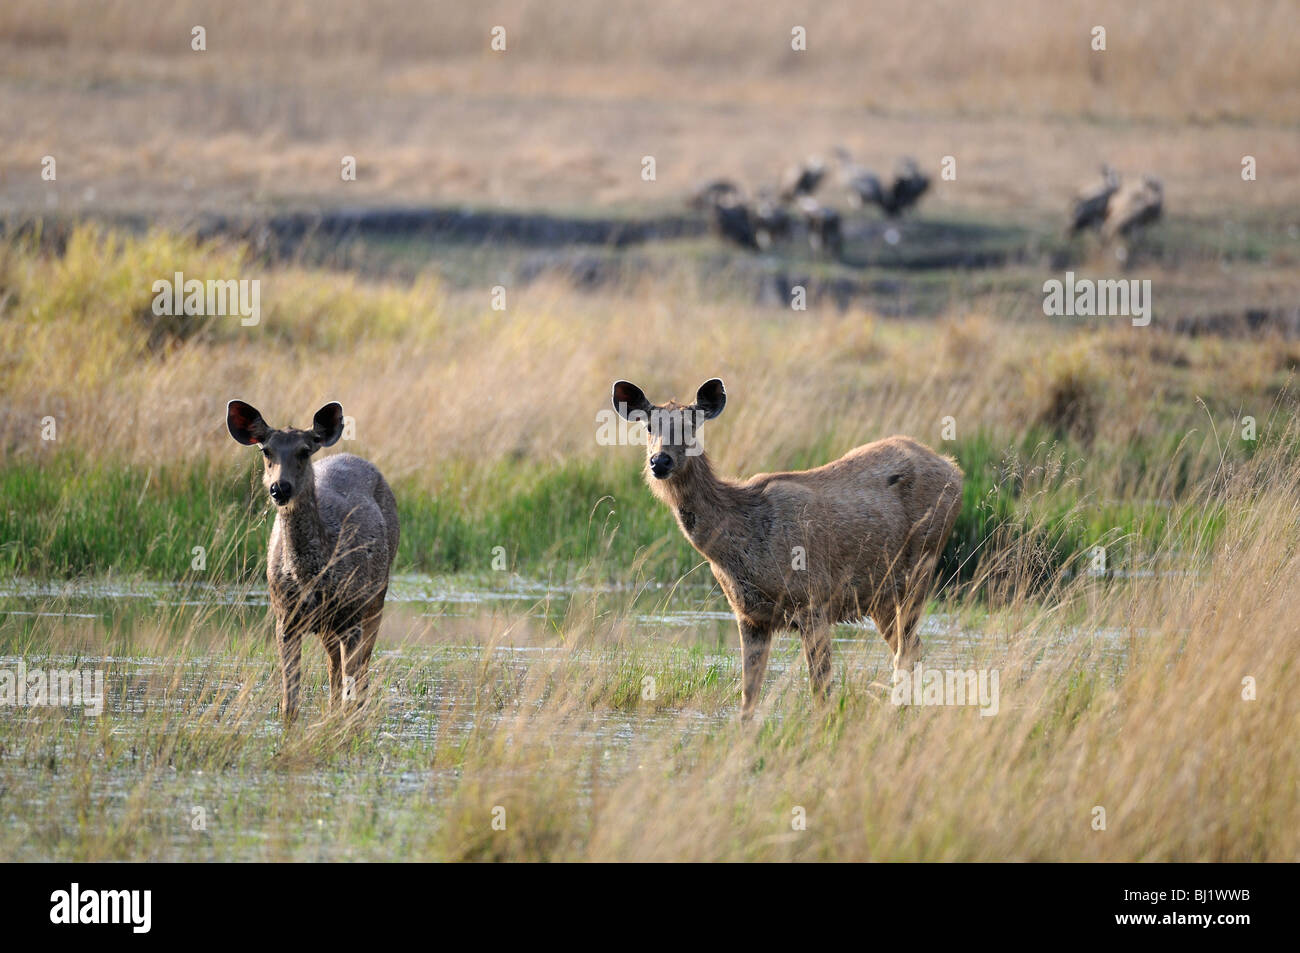 Sambar Deers in water while a group of vultures feed in the background, shot in bandhavgarh tiger reserve, India Stock Photo